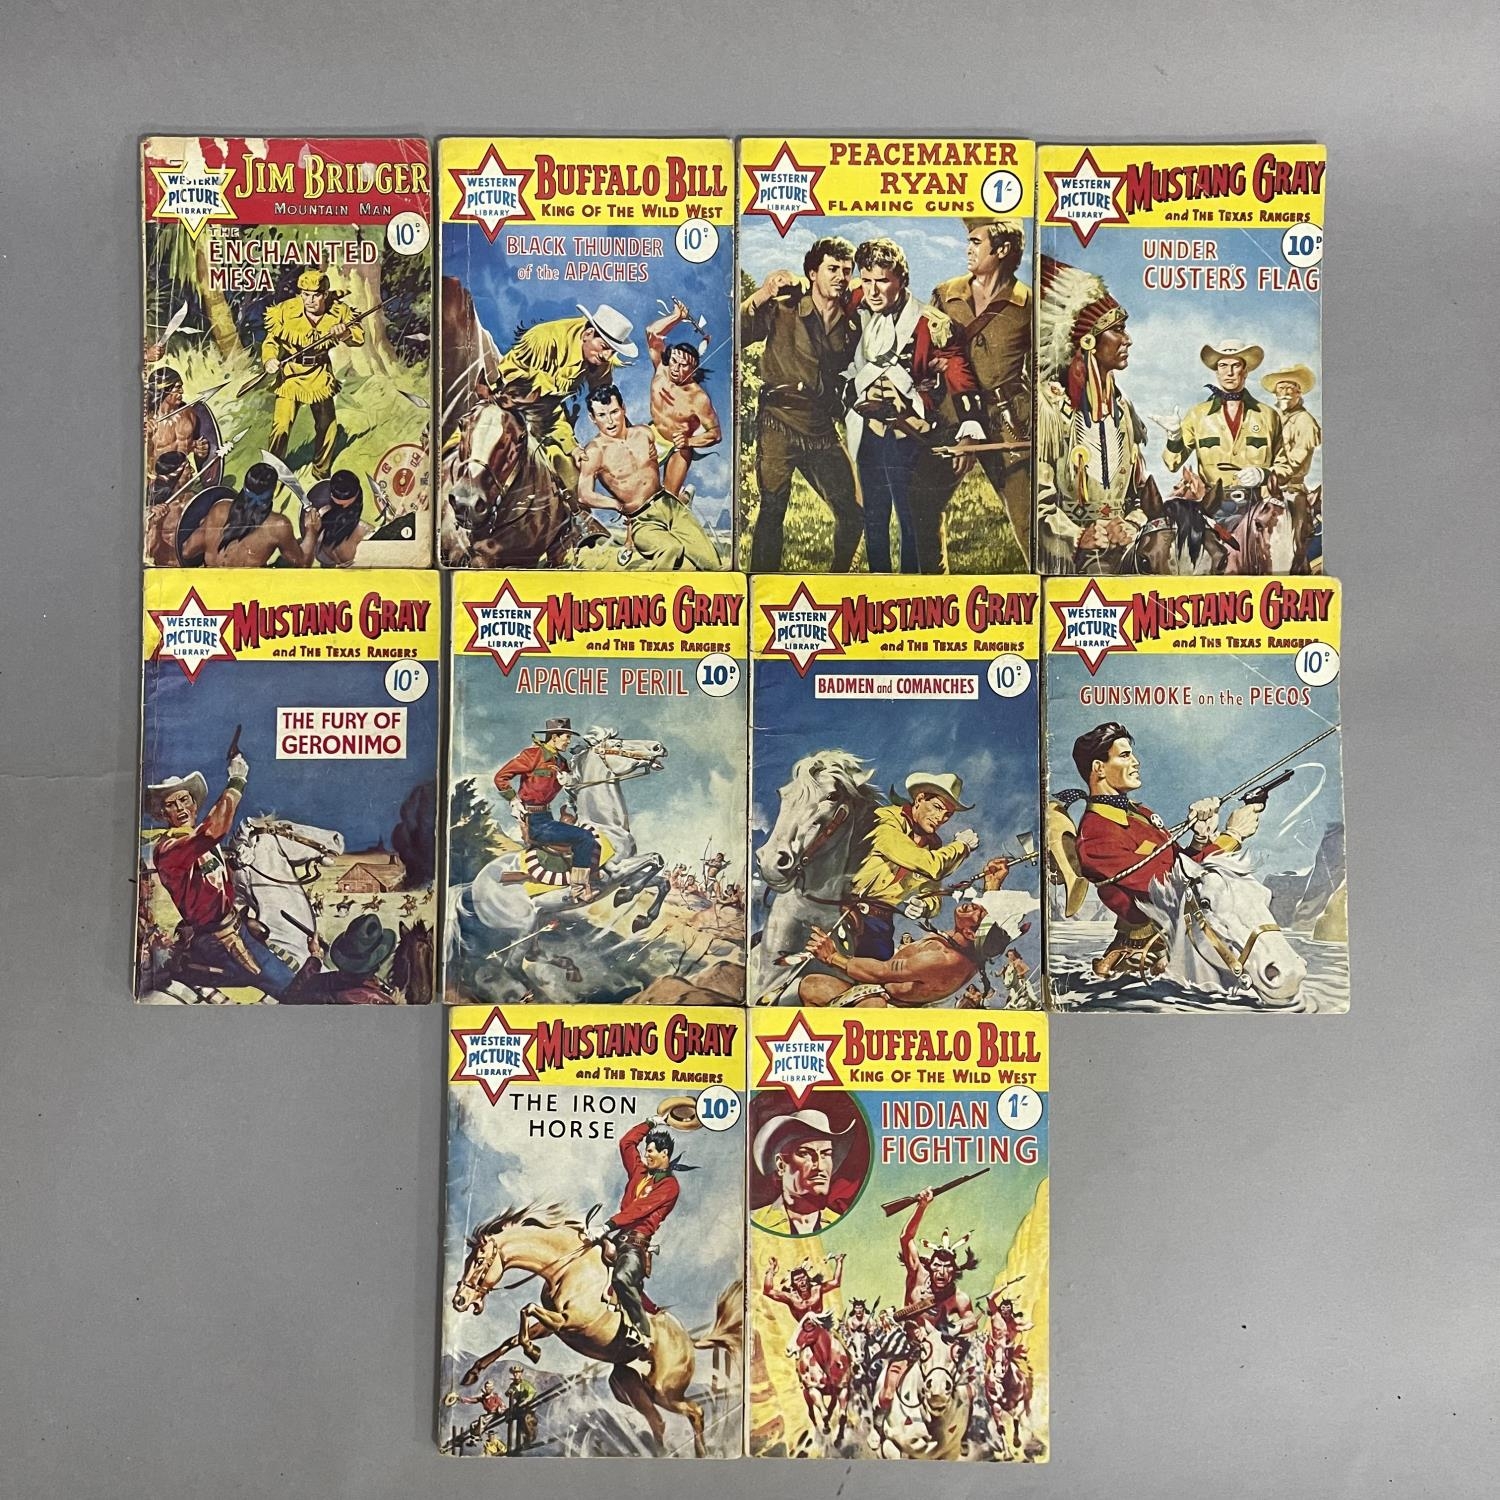 A collection of 31 assorted pocket book format titles from Combat Picture Library, Western Picture